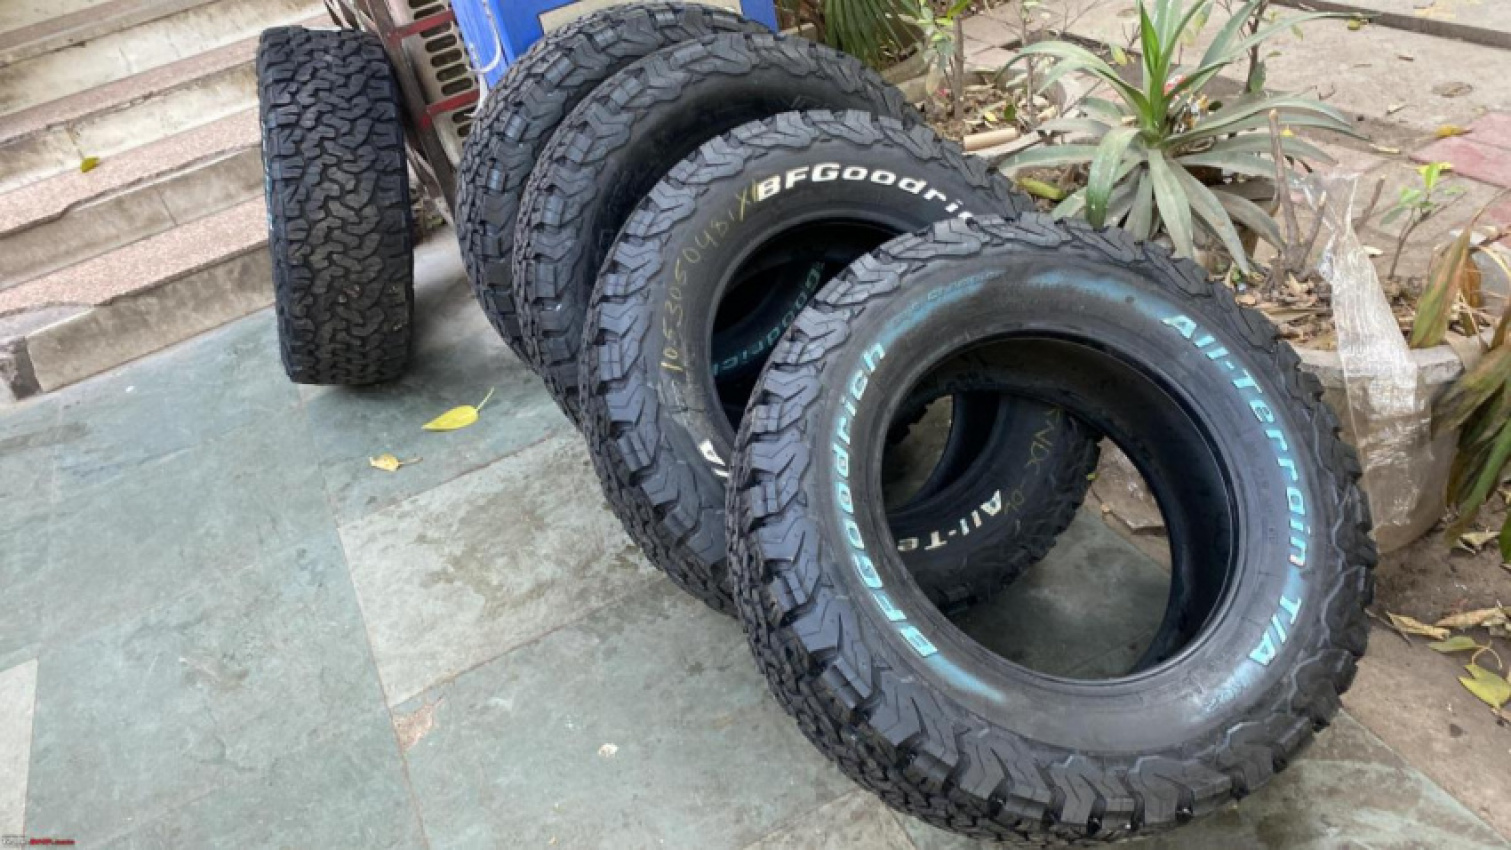 autos, cars, mahindra, accessories & aftermarket parts, indian, mahindra thar, member content, tyres, my mahindra thar gets a new pair of aftermarket rims & tyres installed